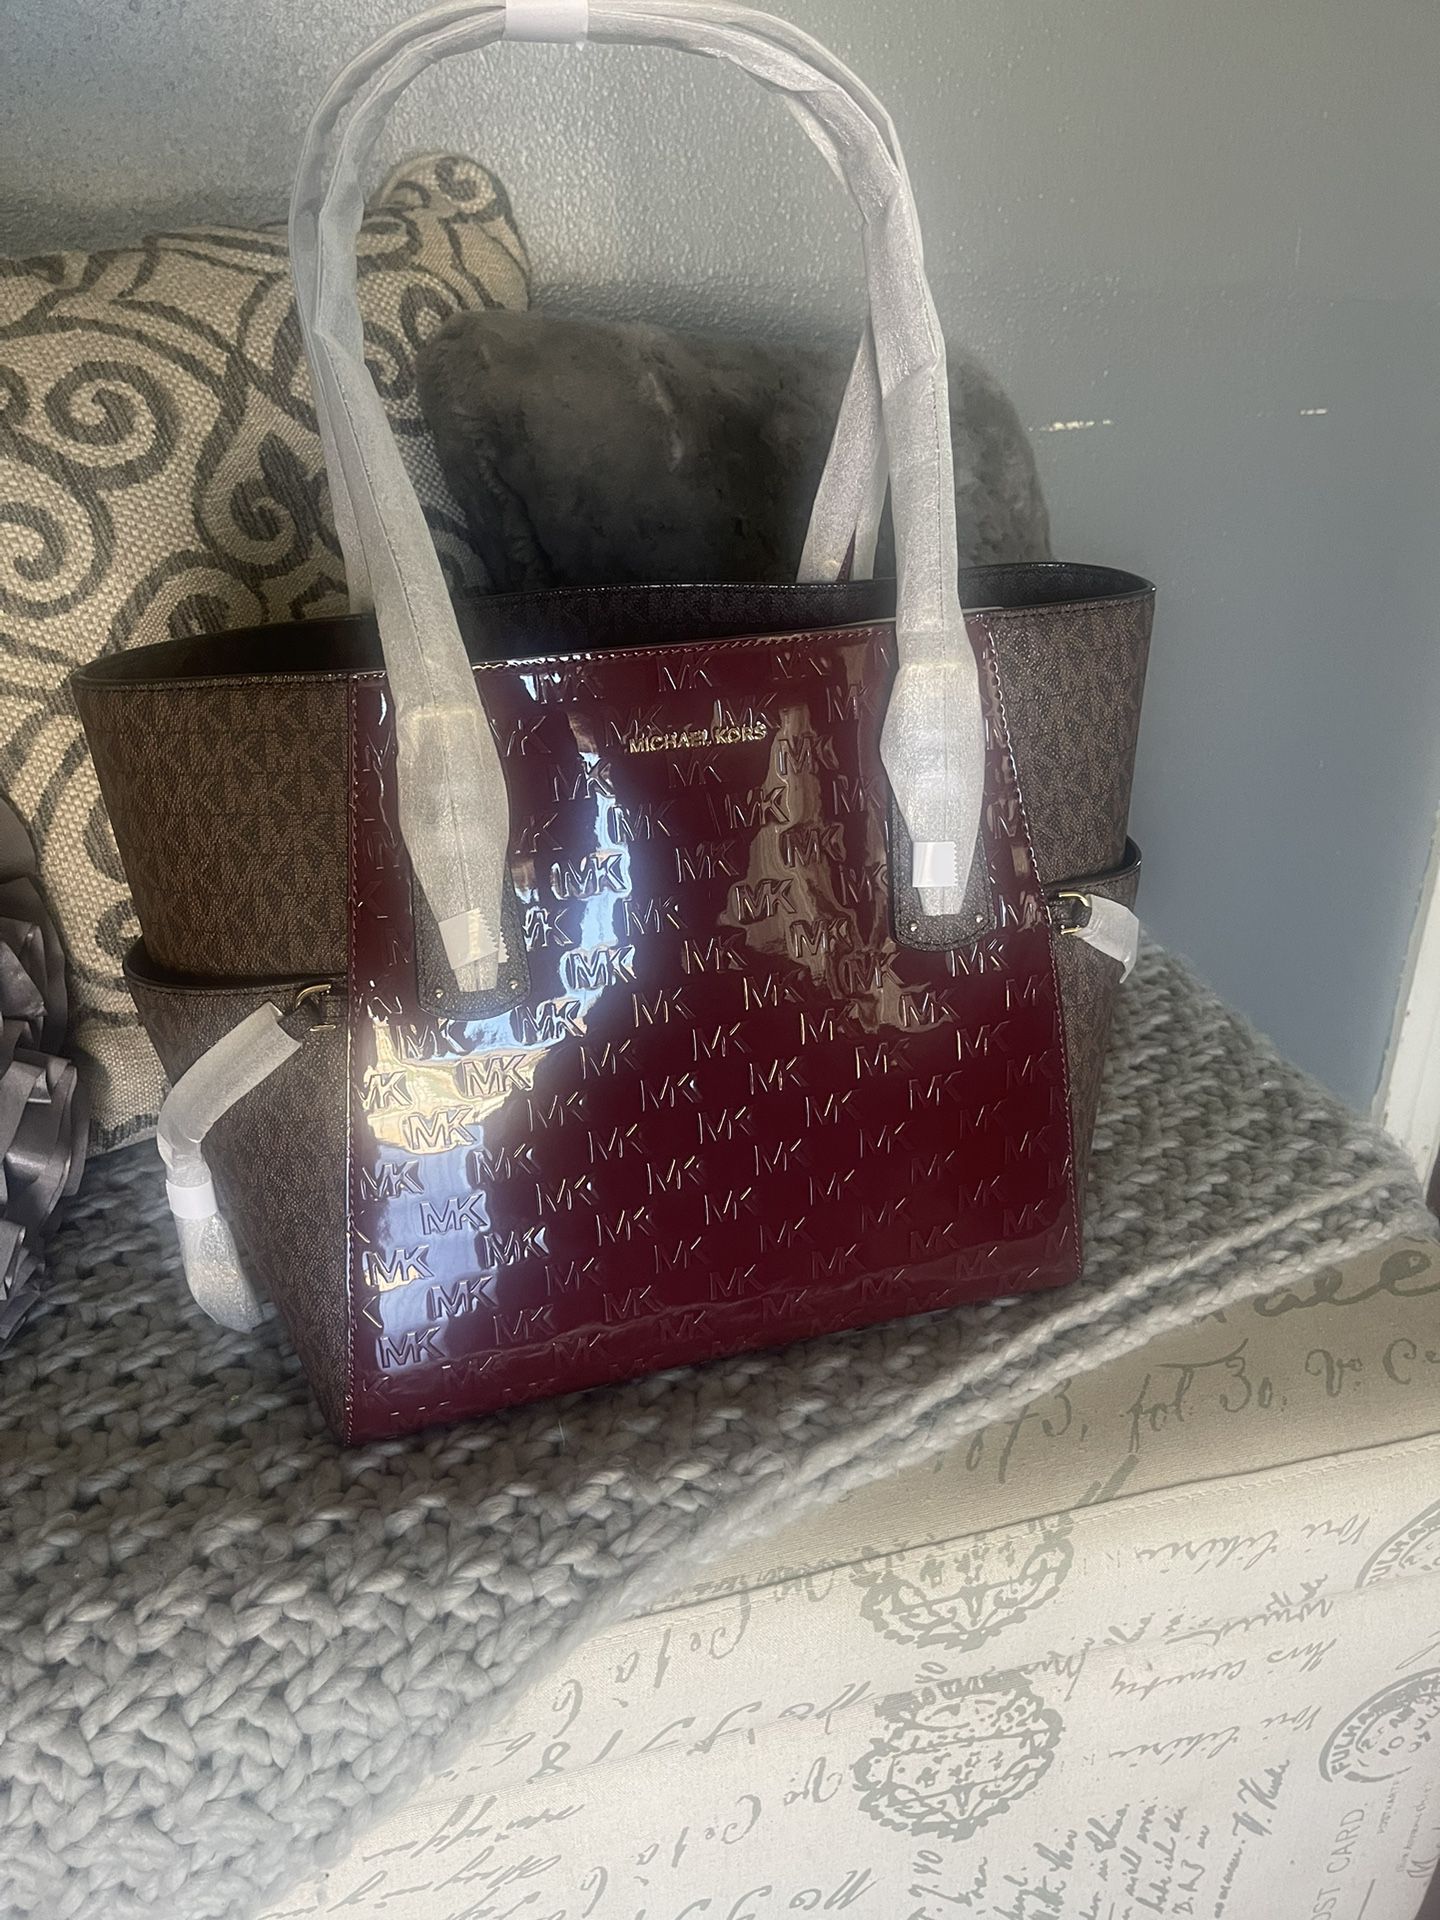 New michael kors bag pick up only for Sale in Montclair, CA - OfferUp